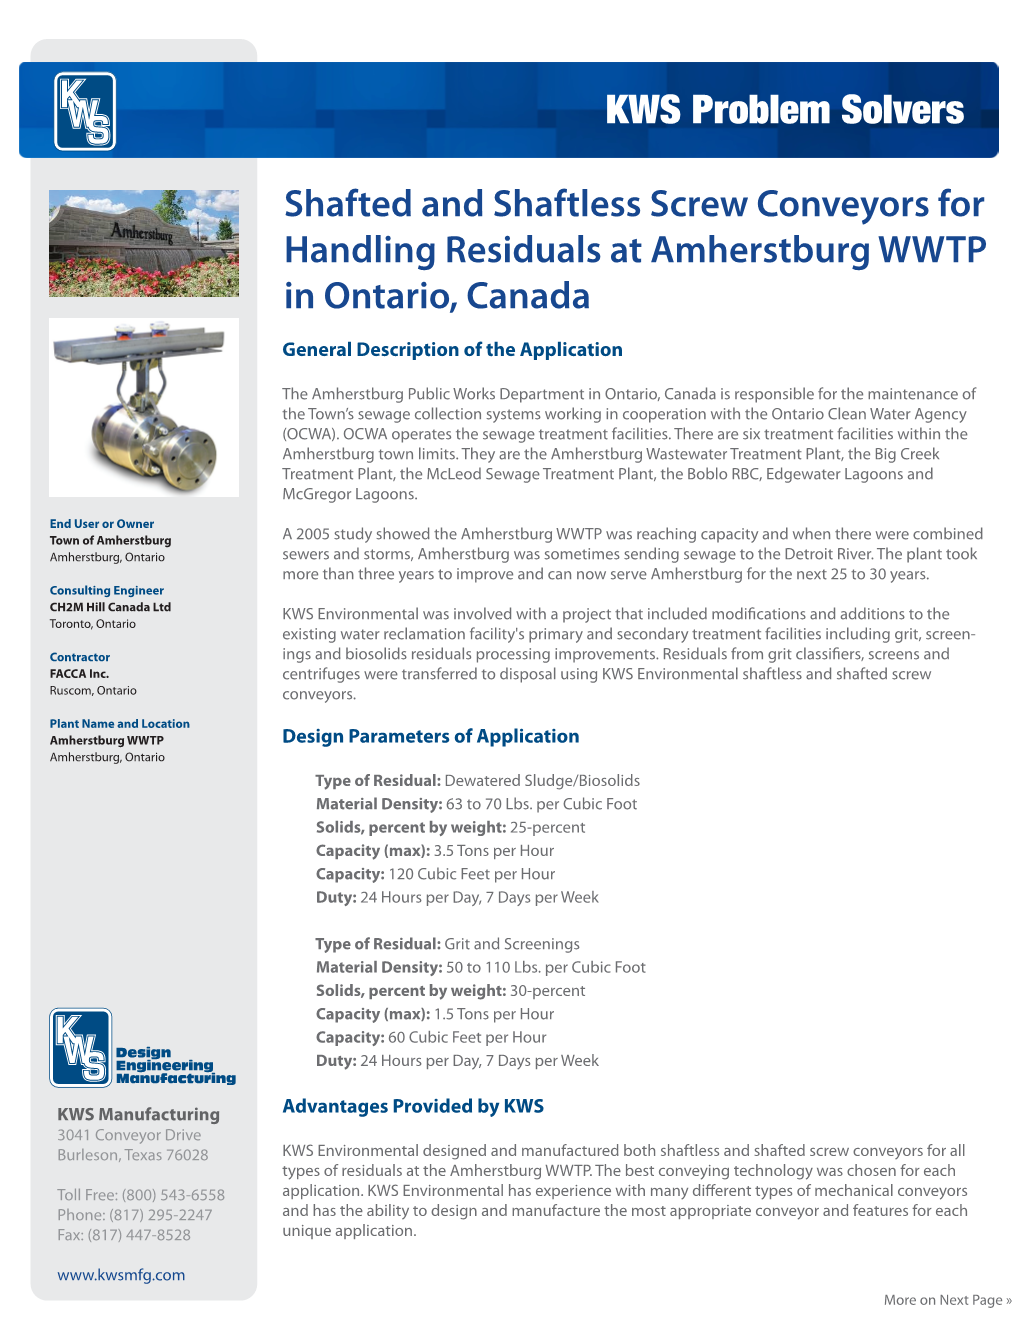 Shafted and Shaftless Screw Conveyors for Handling Residuals at Amherstburg WWTP in Ontario, Canada